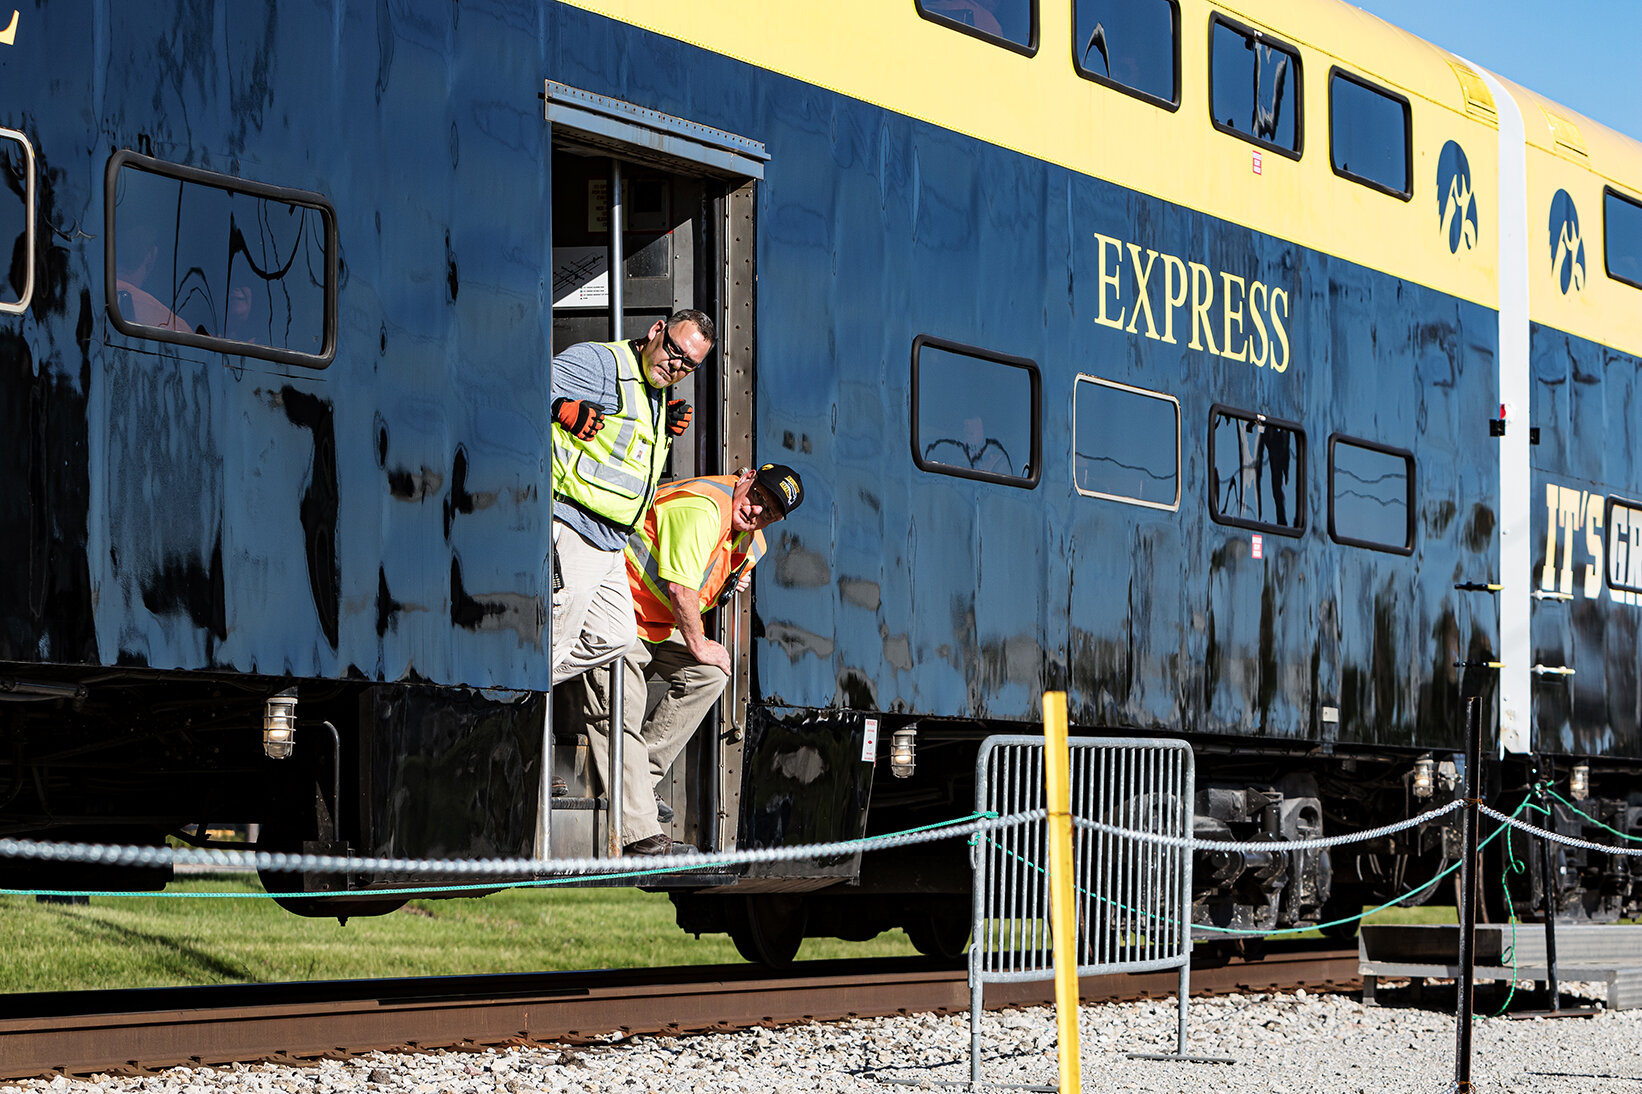  Hawkeye Express personnel hang out of the vestibule of a car to check for train safety as the train pulls out of Coralville, IA en route to Kinnick Stadium on Saturday, Sep. 22, 2018.  